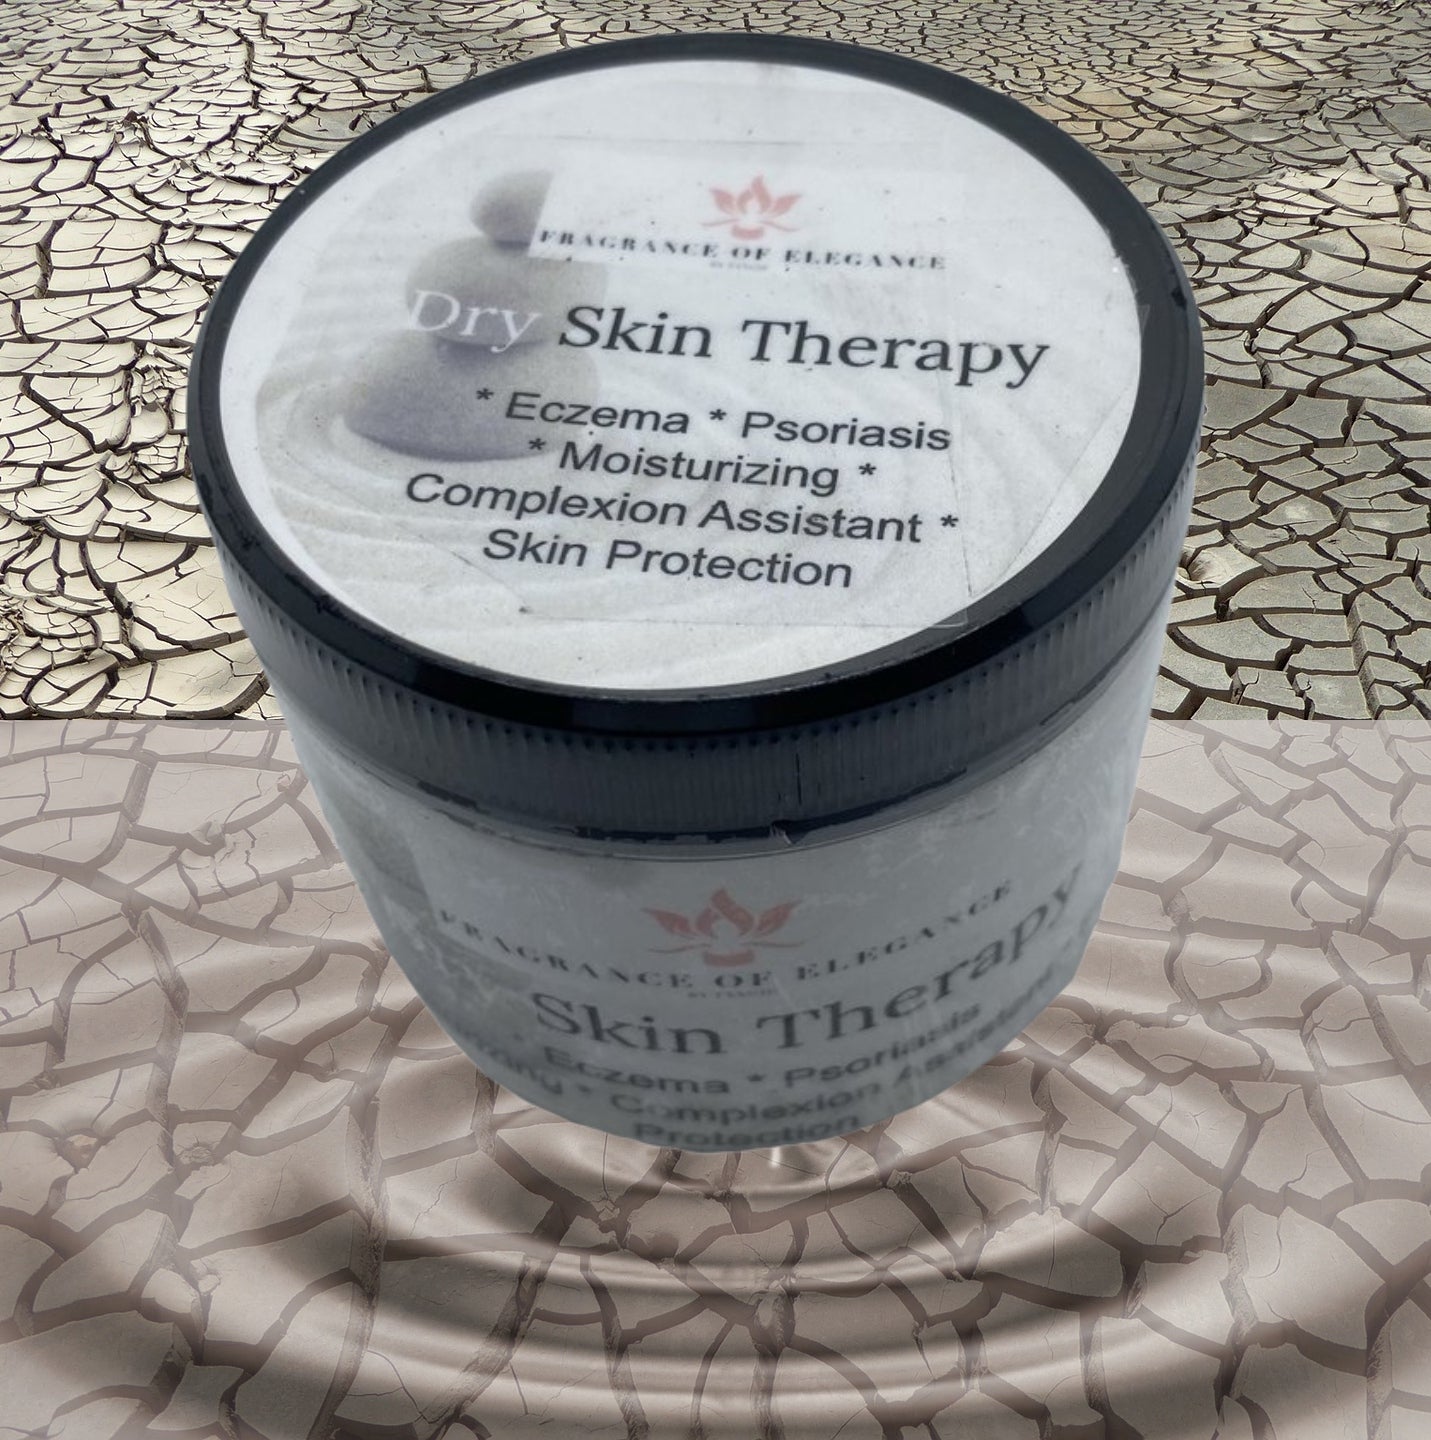 Dry Skin Therapy - Fragrance of Elegance